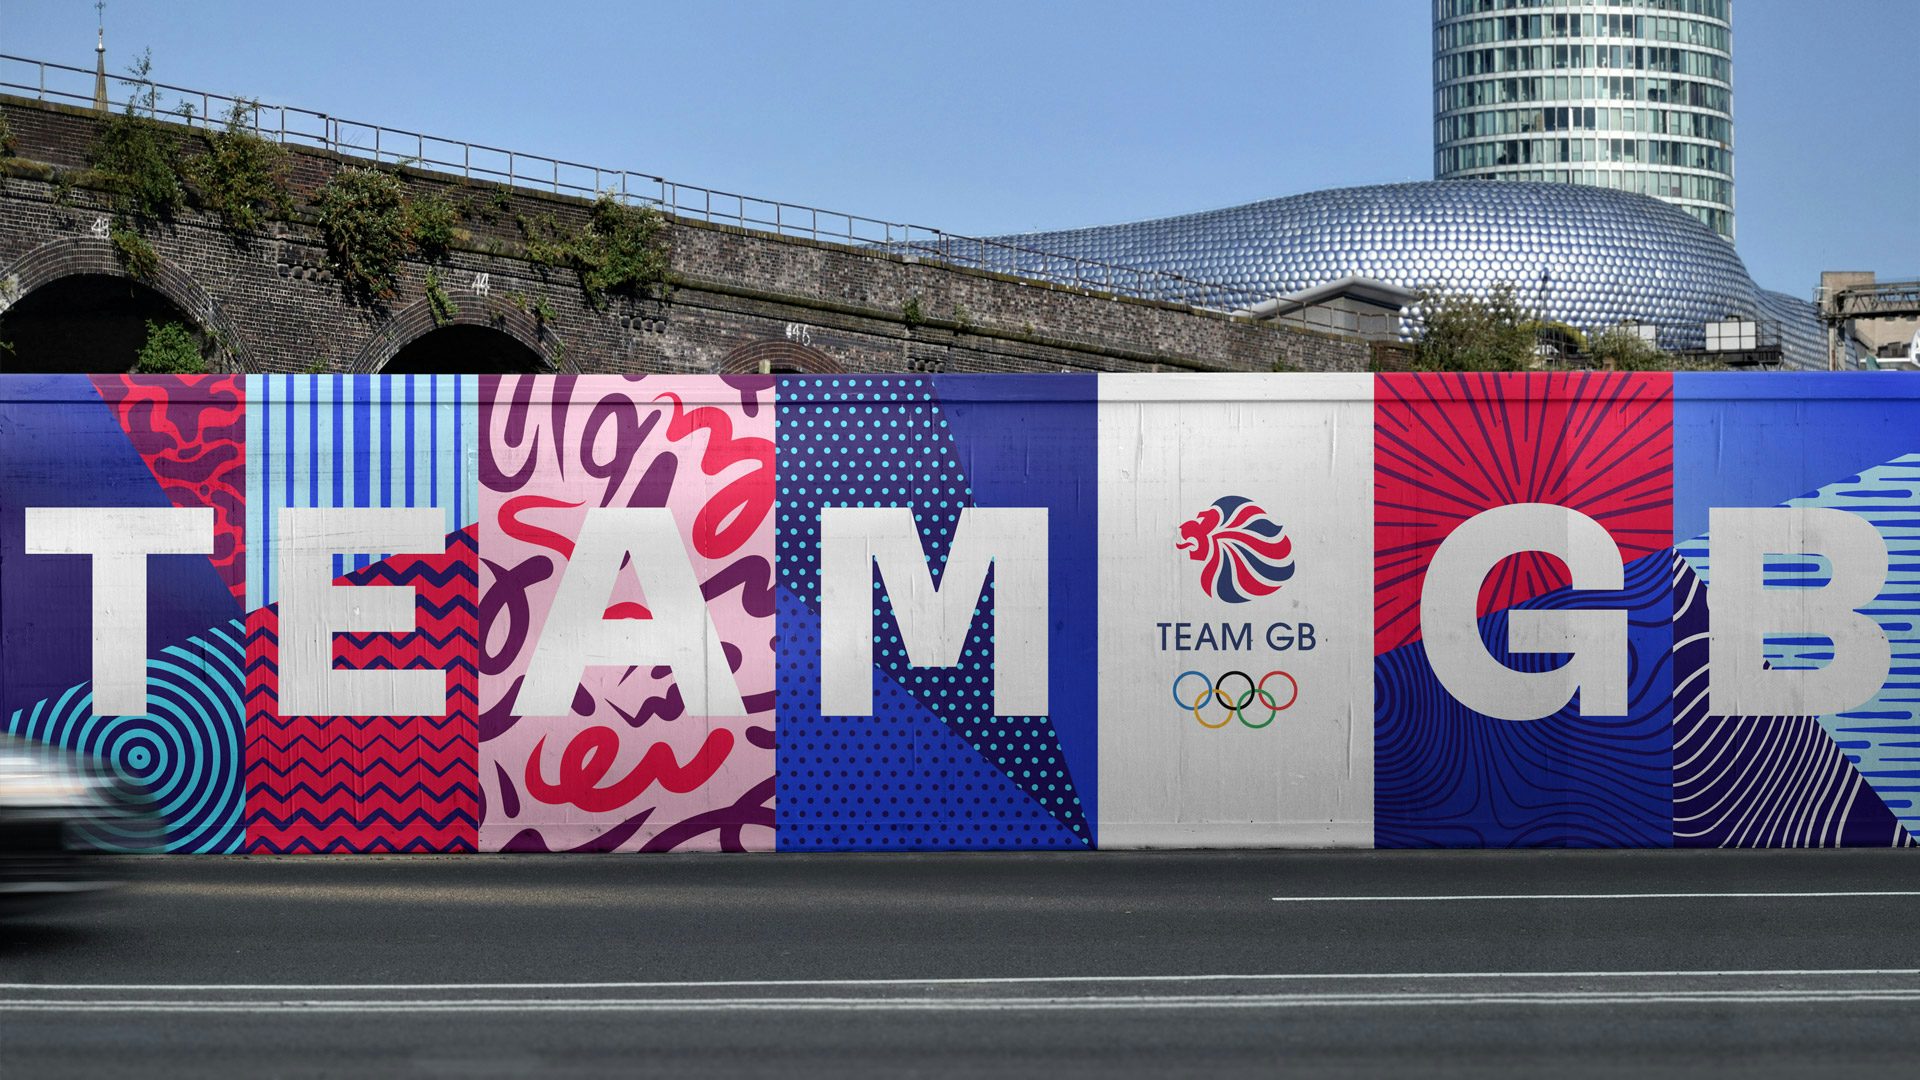 Graphic featuring the Team GB rebrand as shown on an outdoor billboard headlined 'Team GB', with different graphic patterns separating each letter